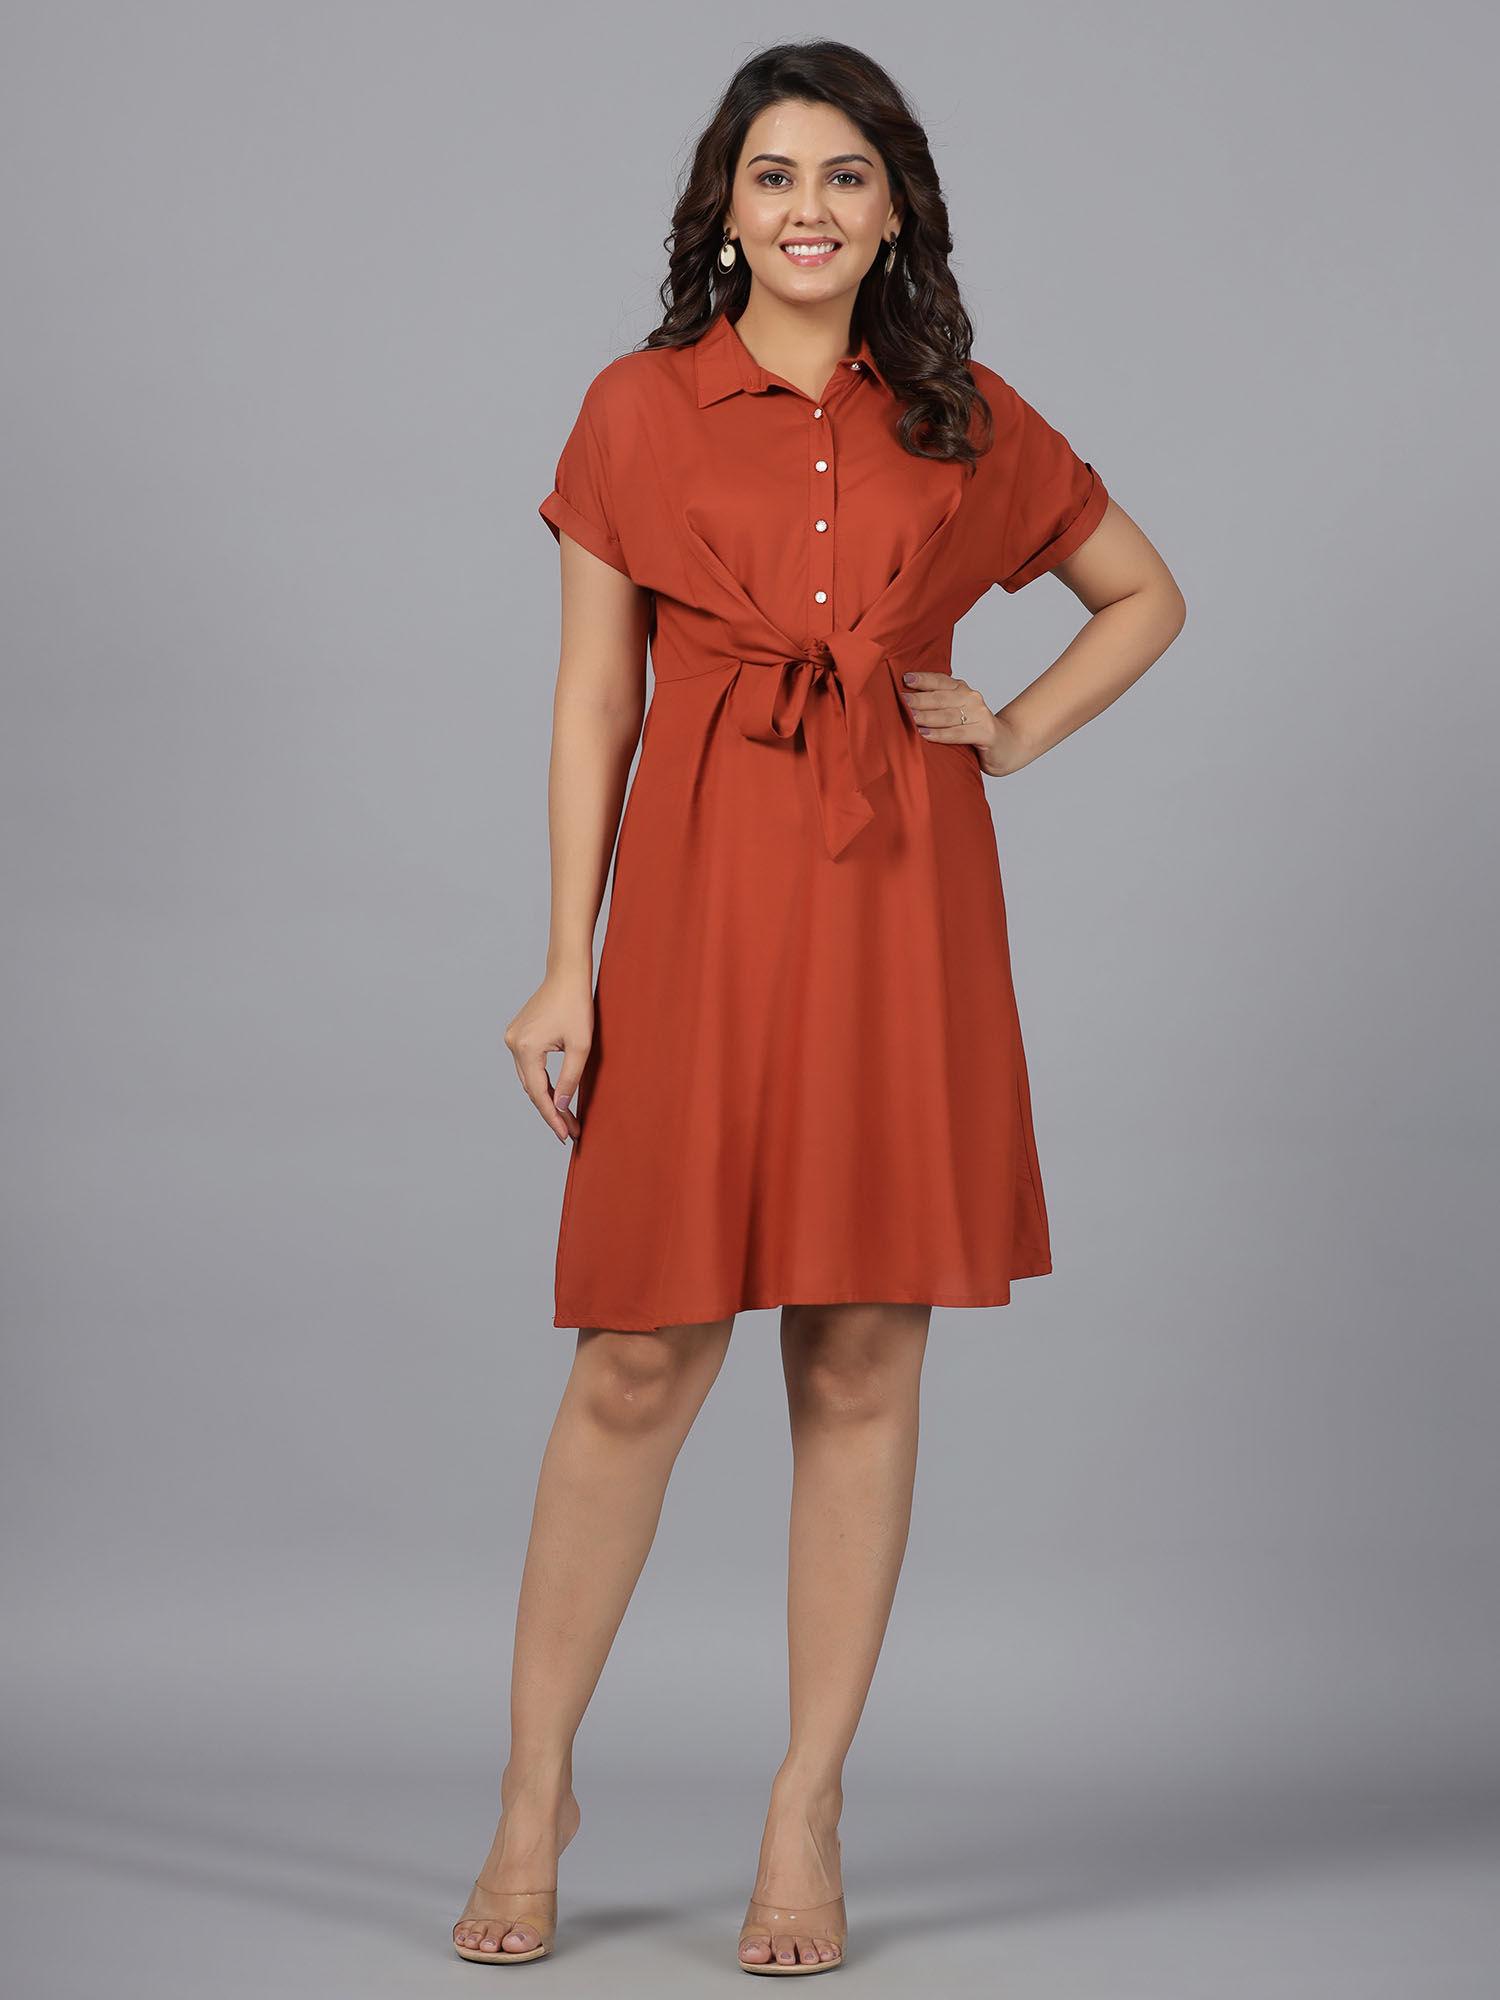 rust solid a-lined rayon dress with contrast buttons & front tie ups